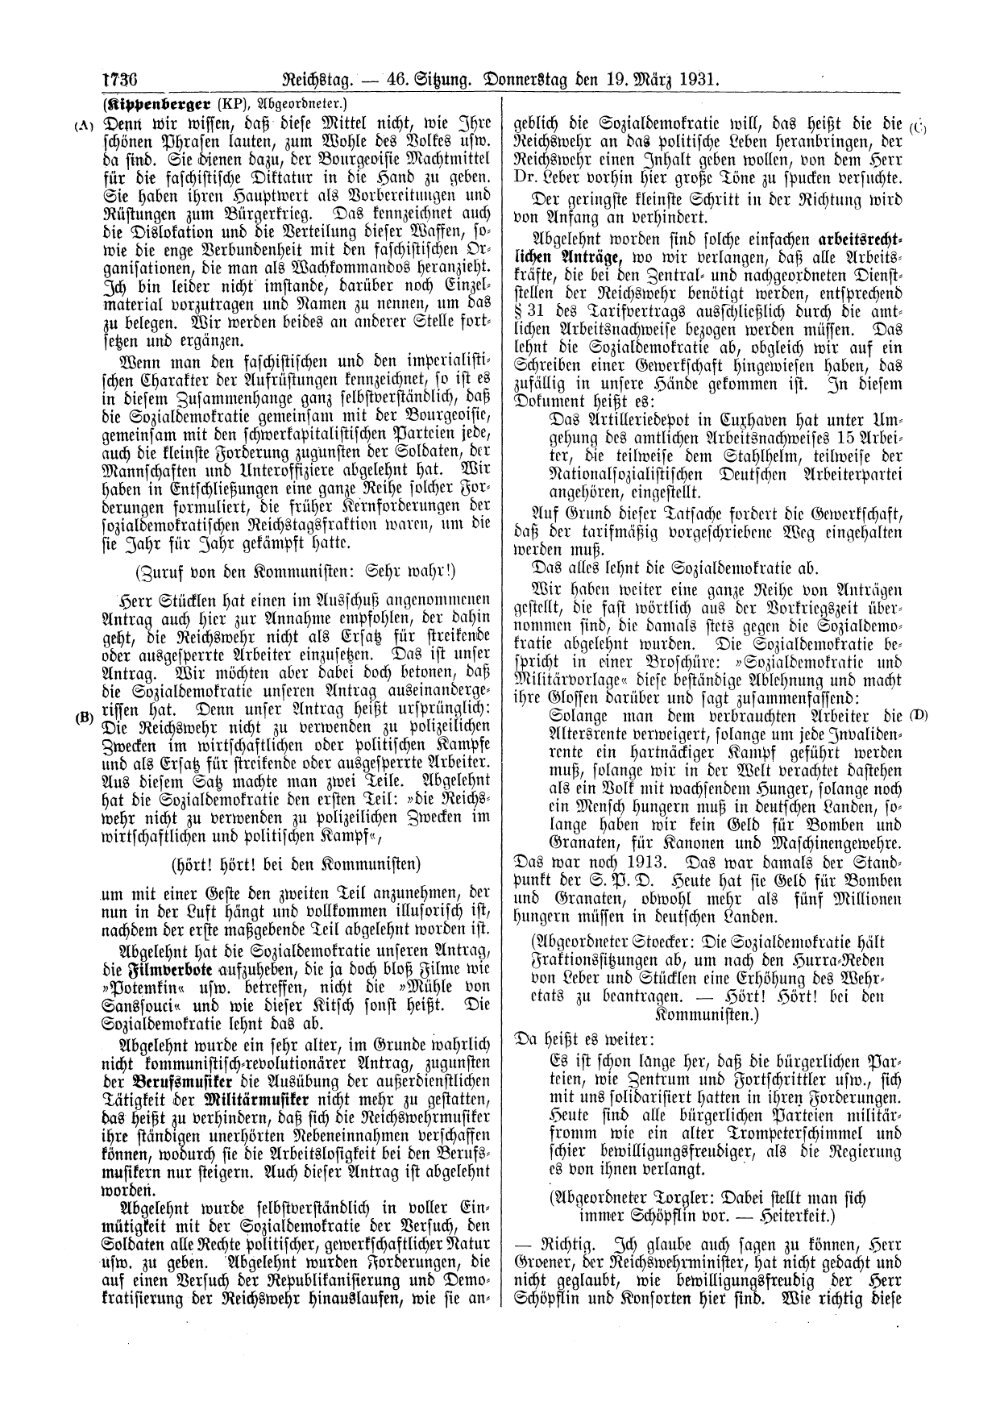 Scan of page 1736